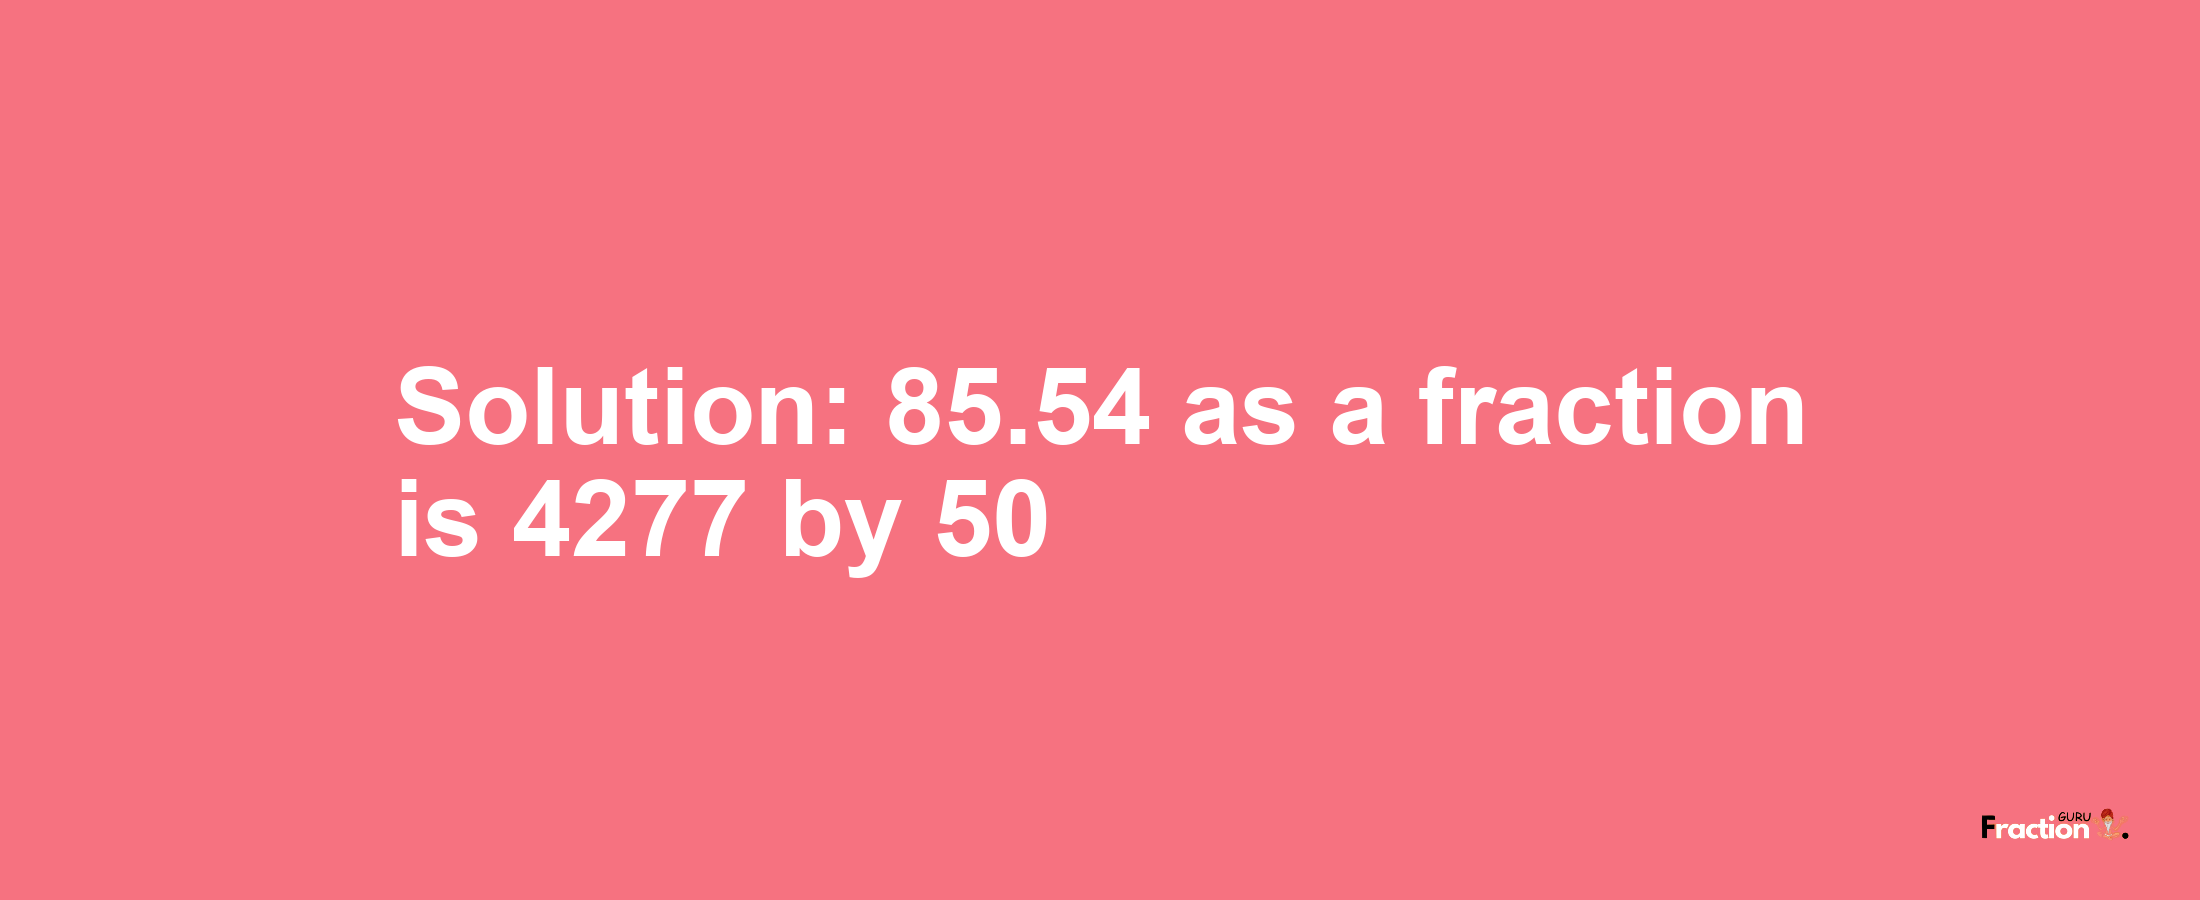 Solution:85.54 as a fraction is 4277/50